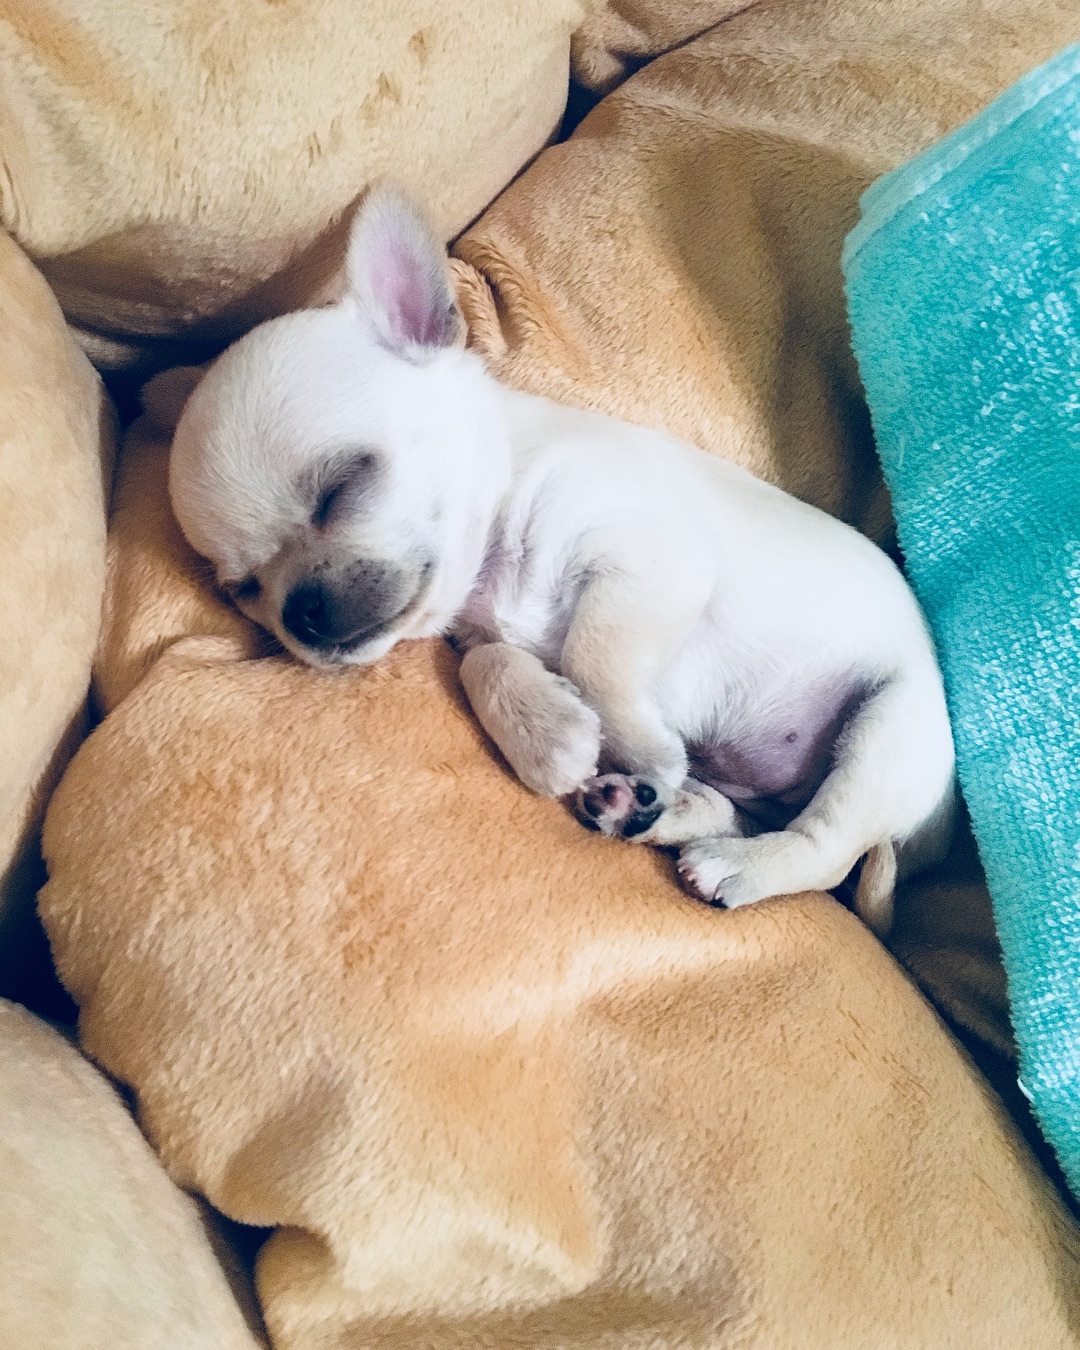 A Chihuahua puppy sleeping soundly on its bed